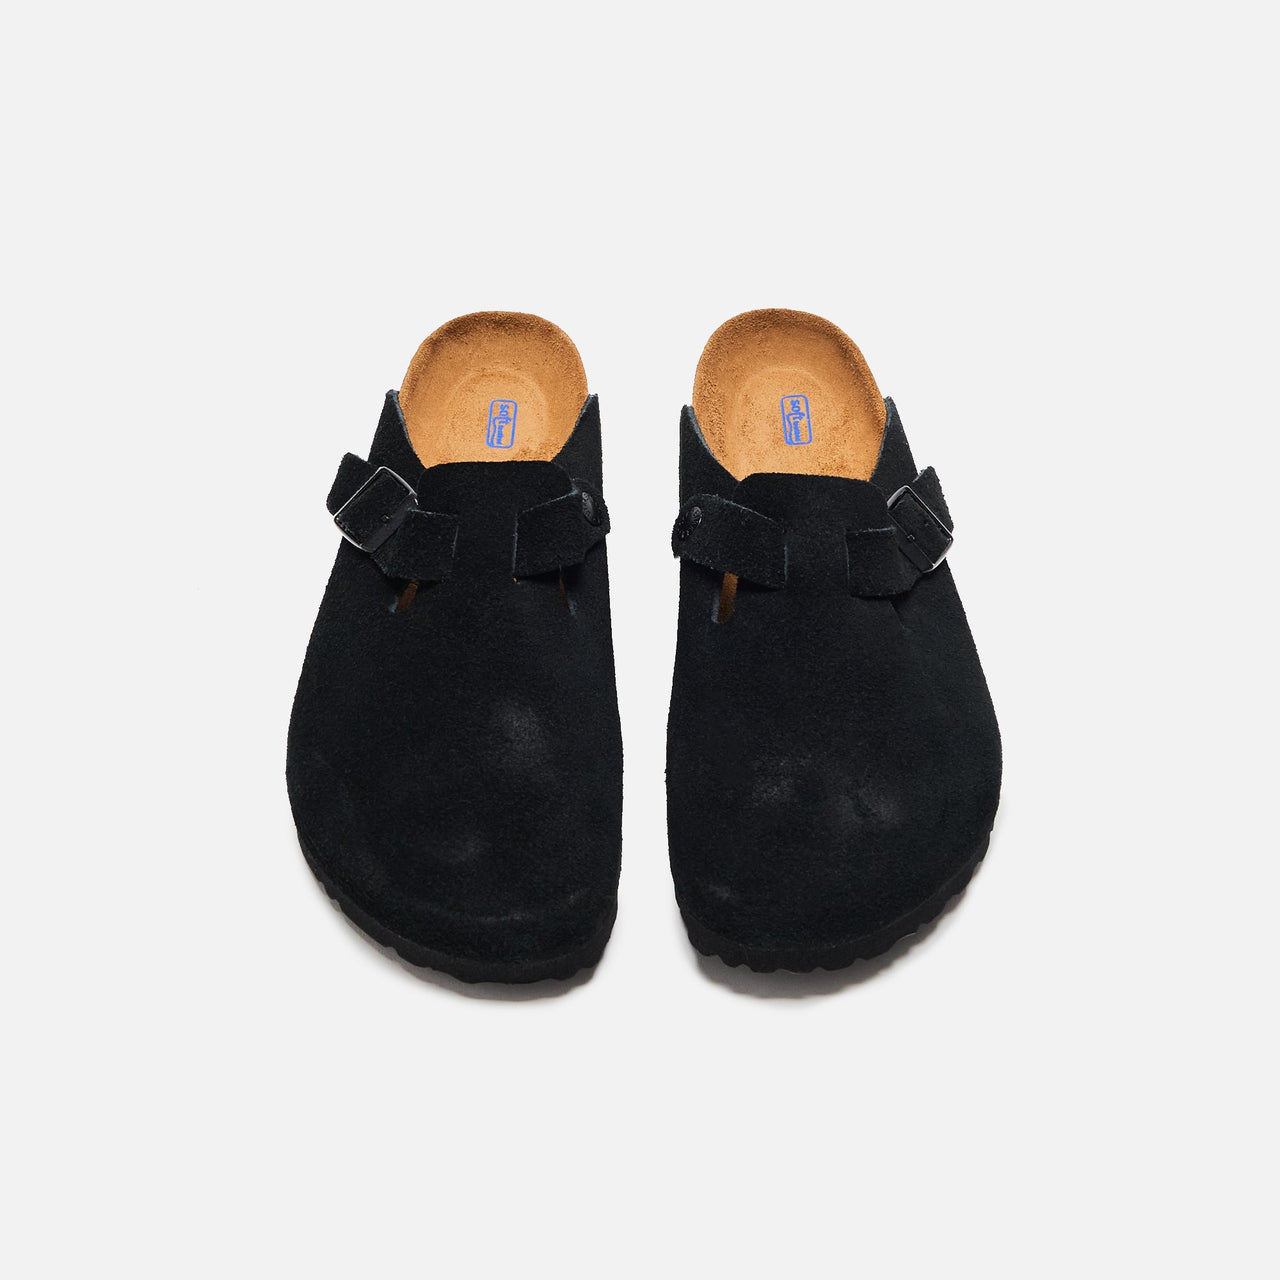 Close-up of the soft suede material of Birkenstock Women's Boston clogs